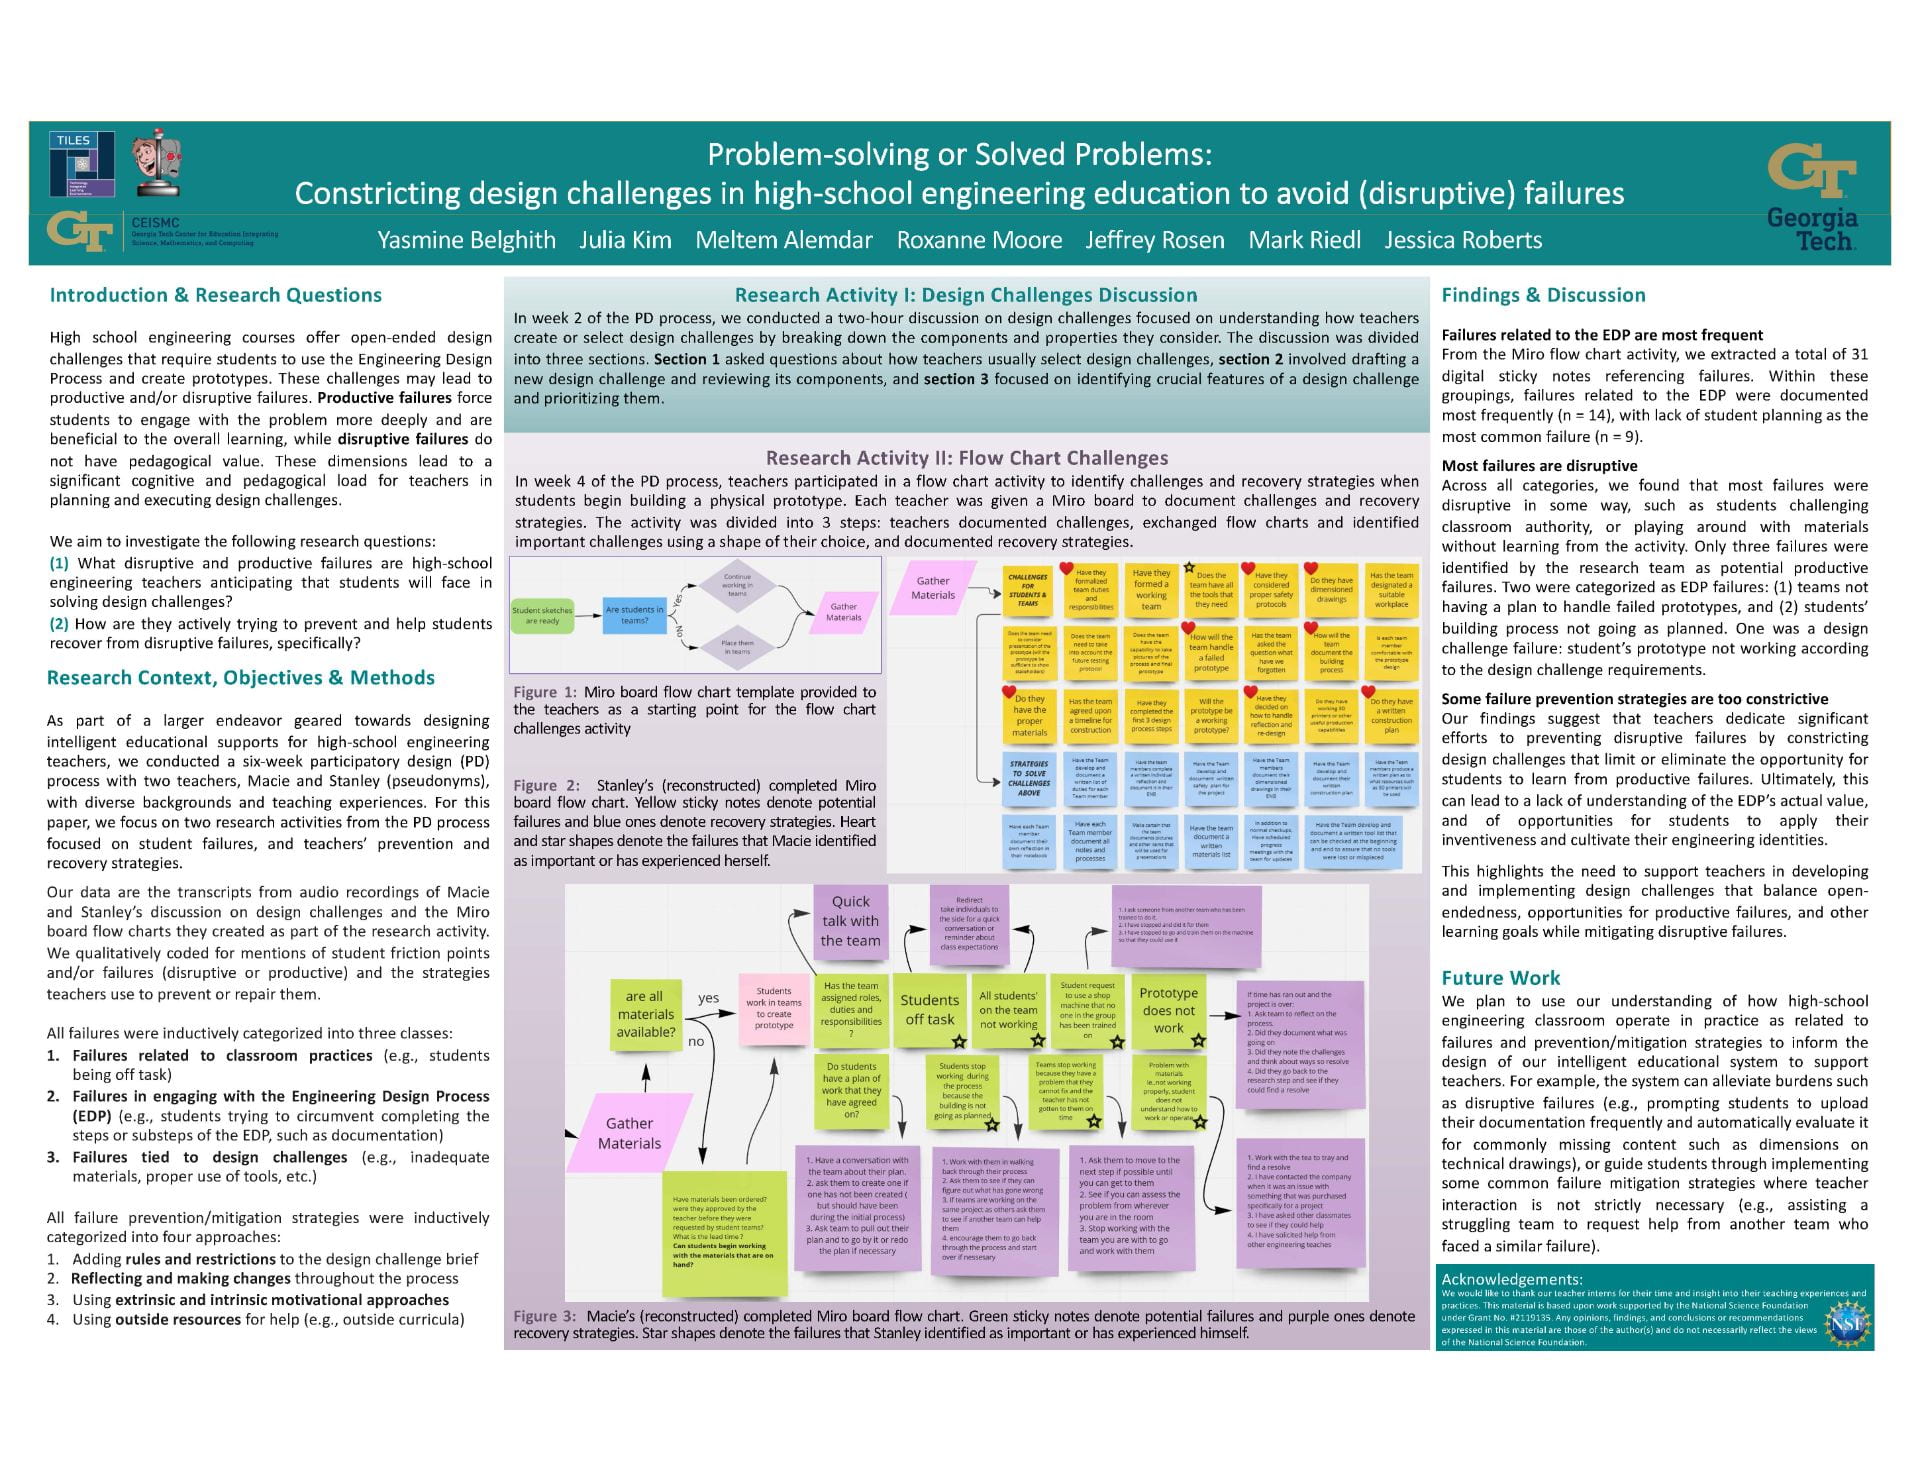 Image of poster presented at ICLS on teachers' processes for planning for productive failure in engineering clasrooms.